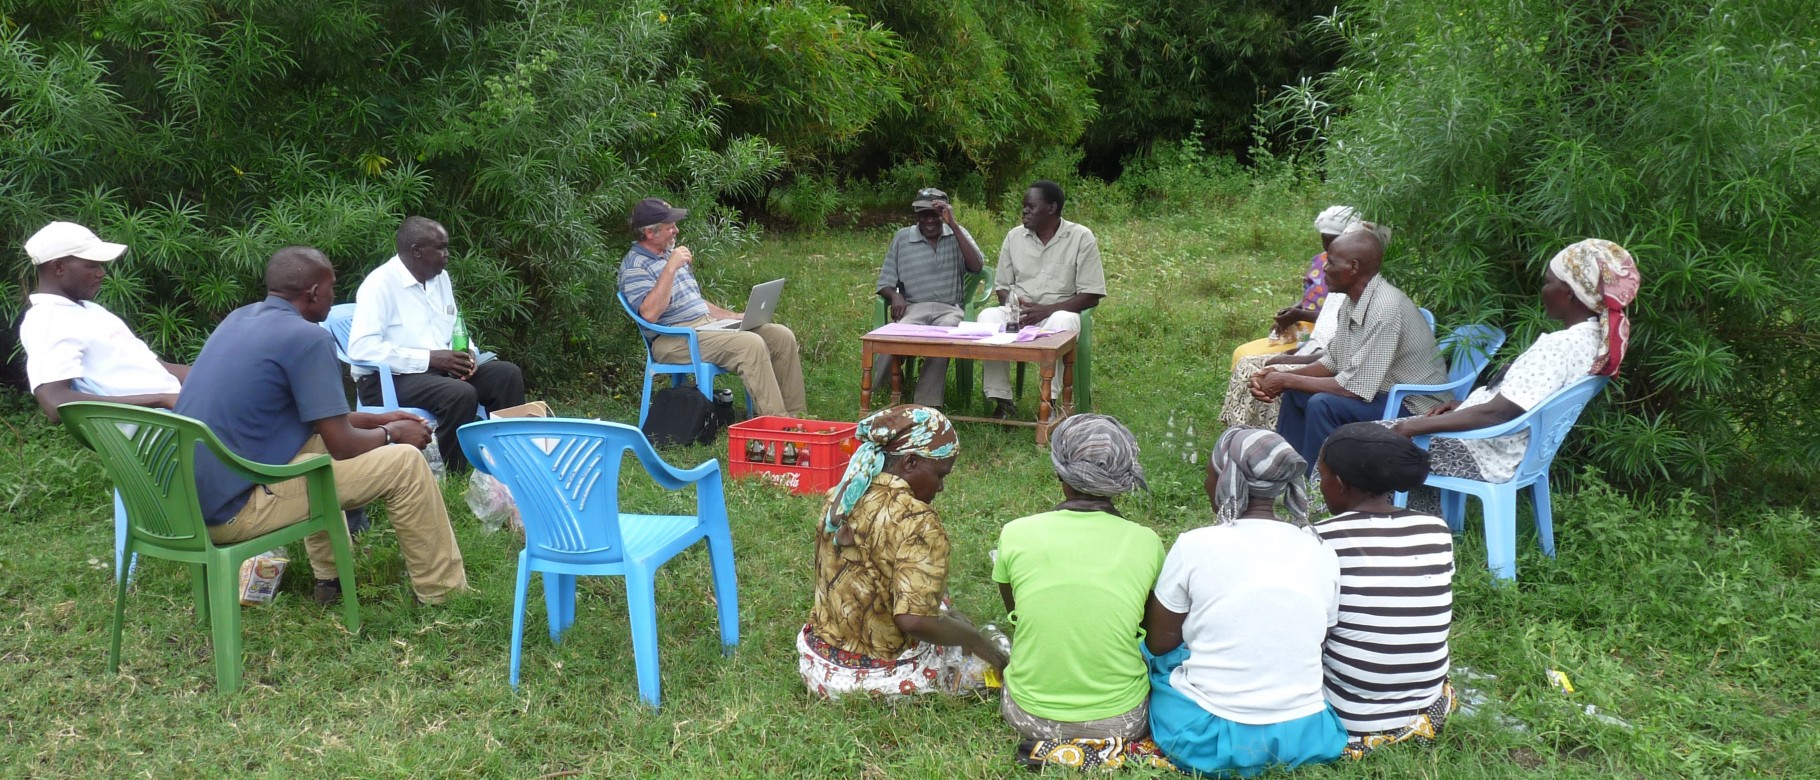 Rick Peterson (left of center table) and one of his Kenyan co-authors Peter Nyabua (center table, right) conduct a focus group w